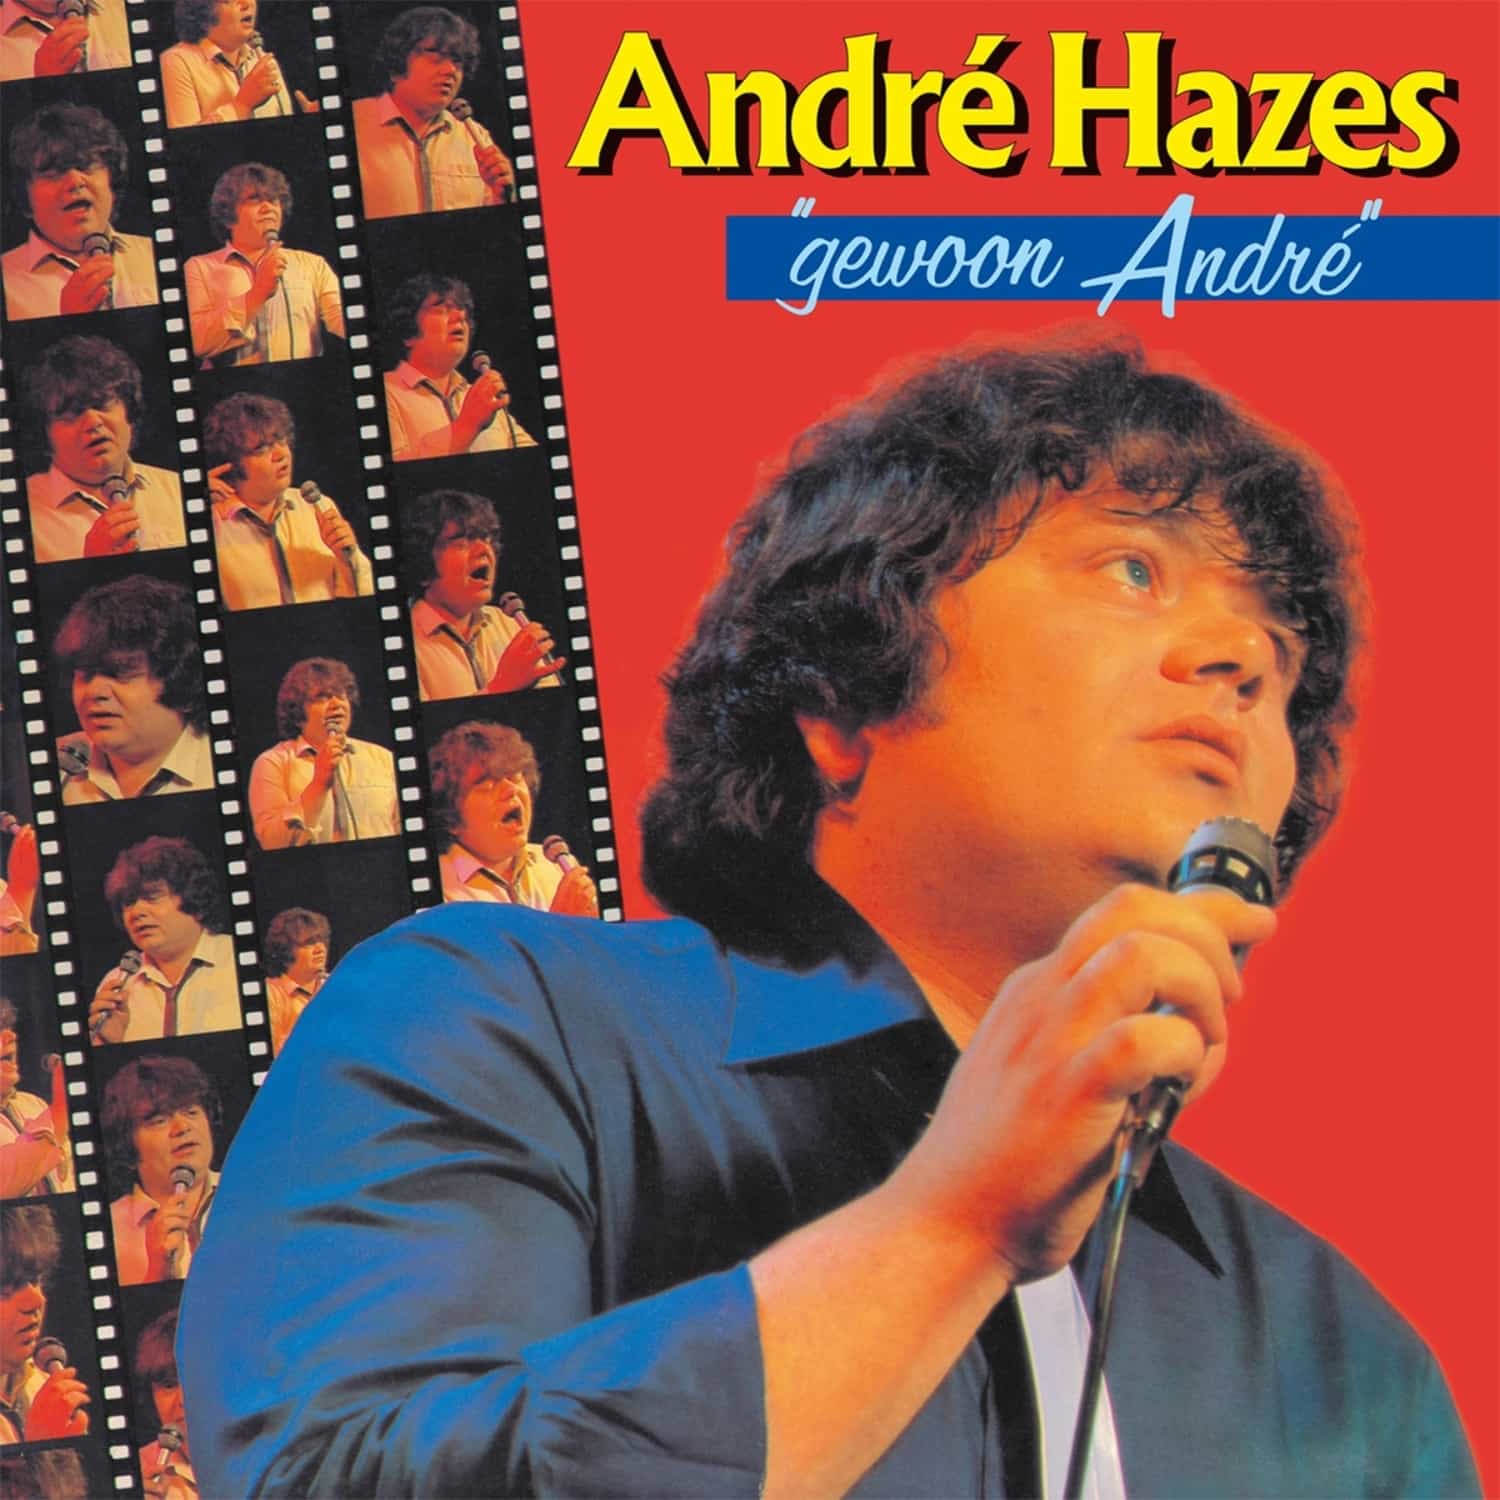  Andre Hazes - GEWOON ANDRE 